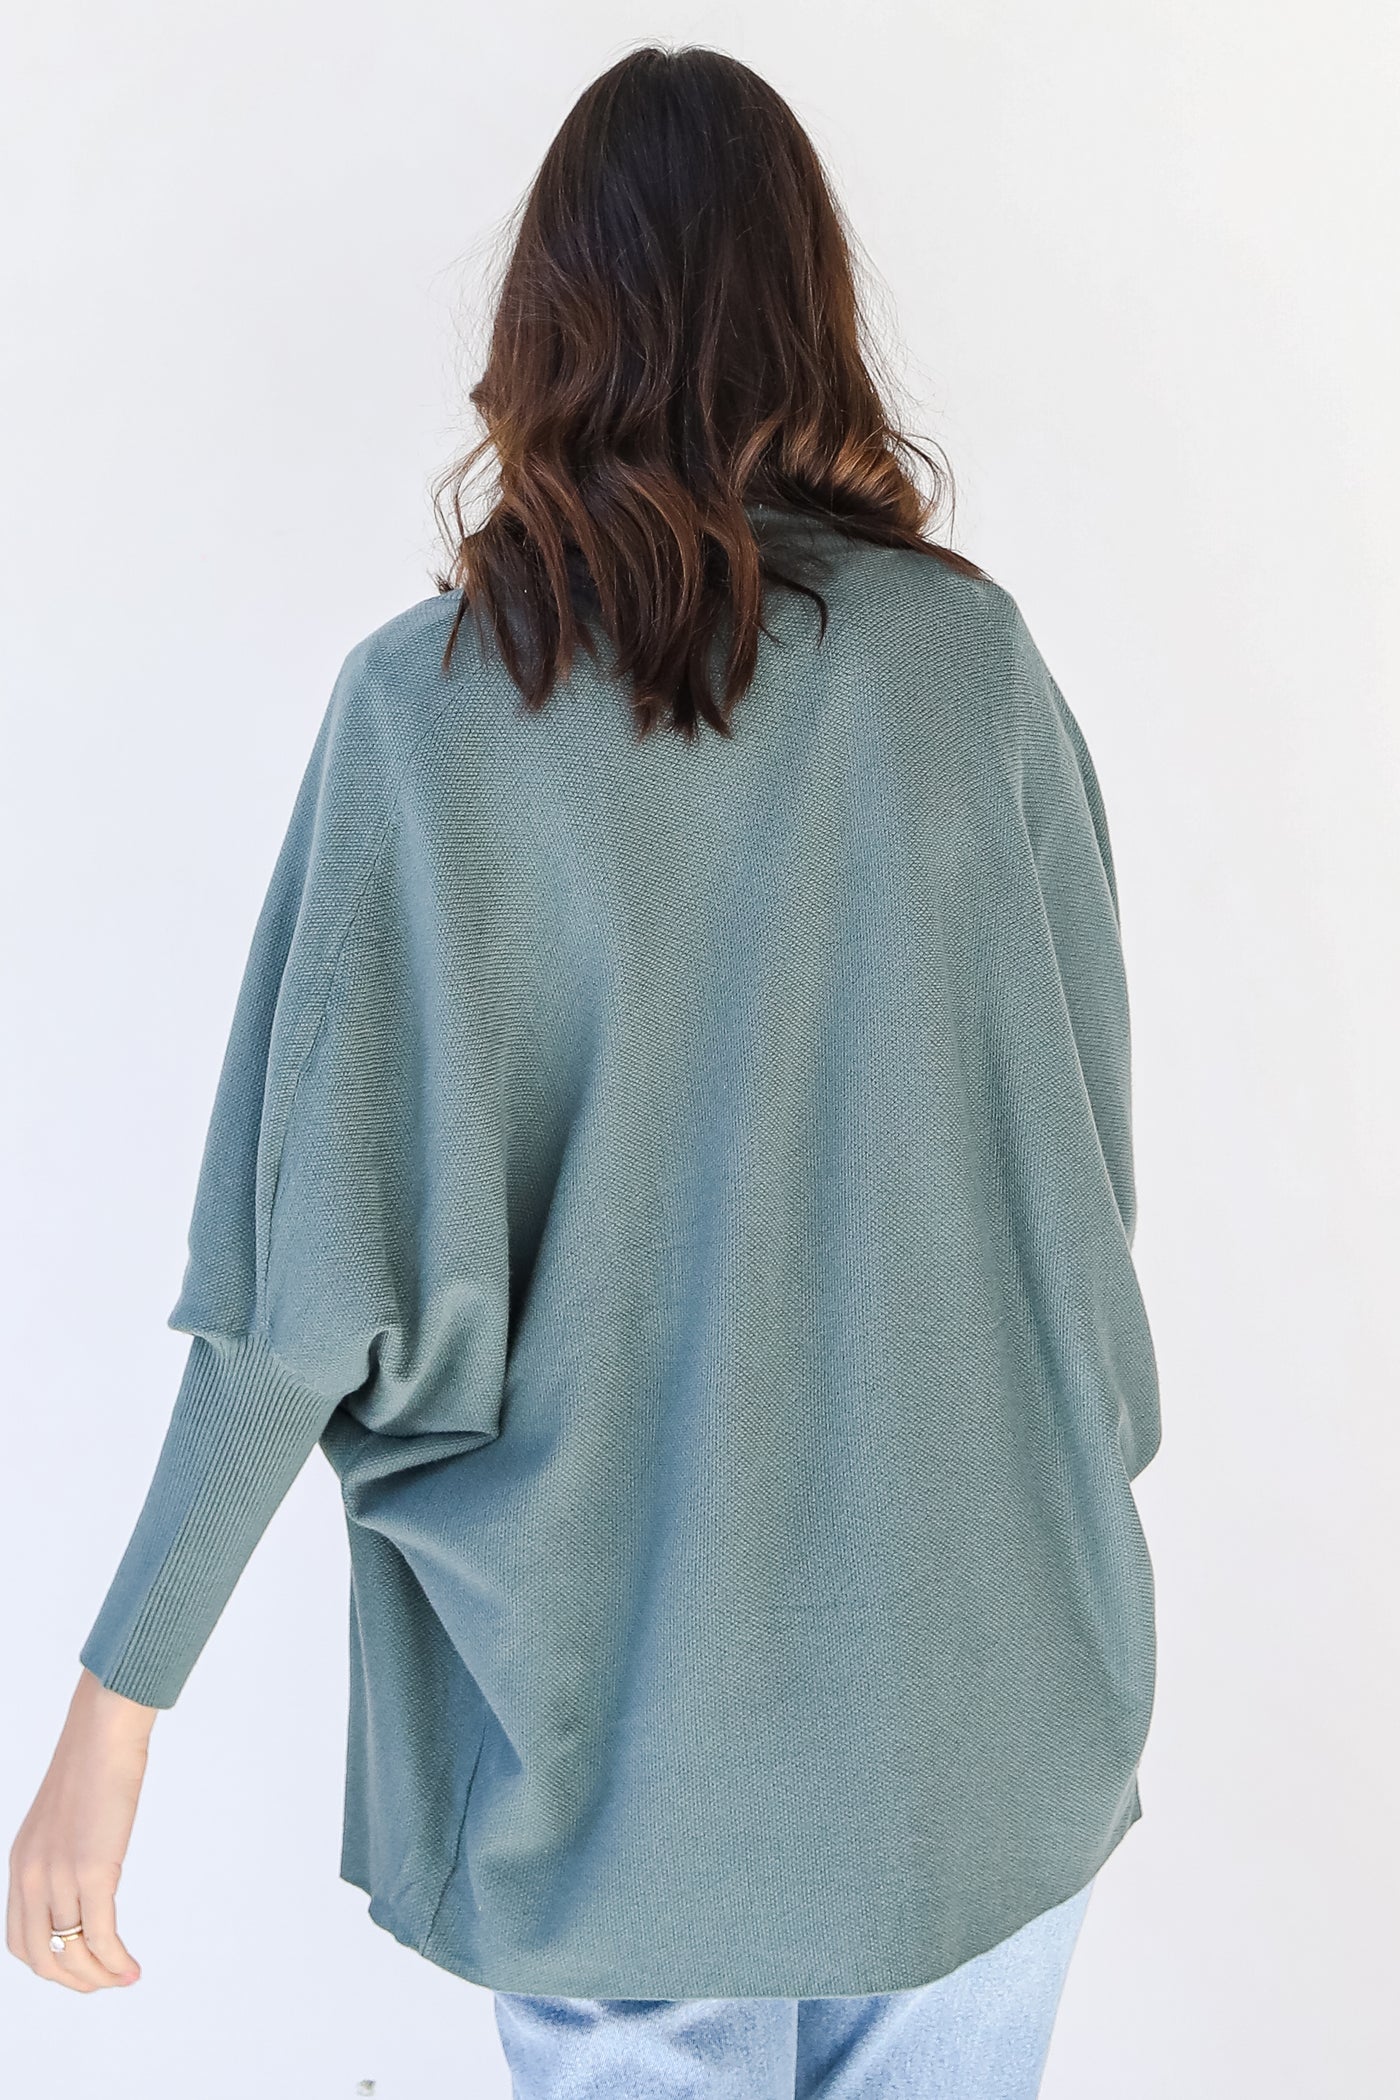 Cardigan in green back view